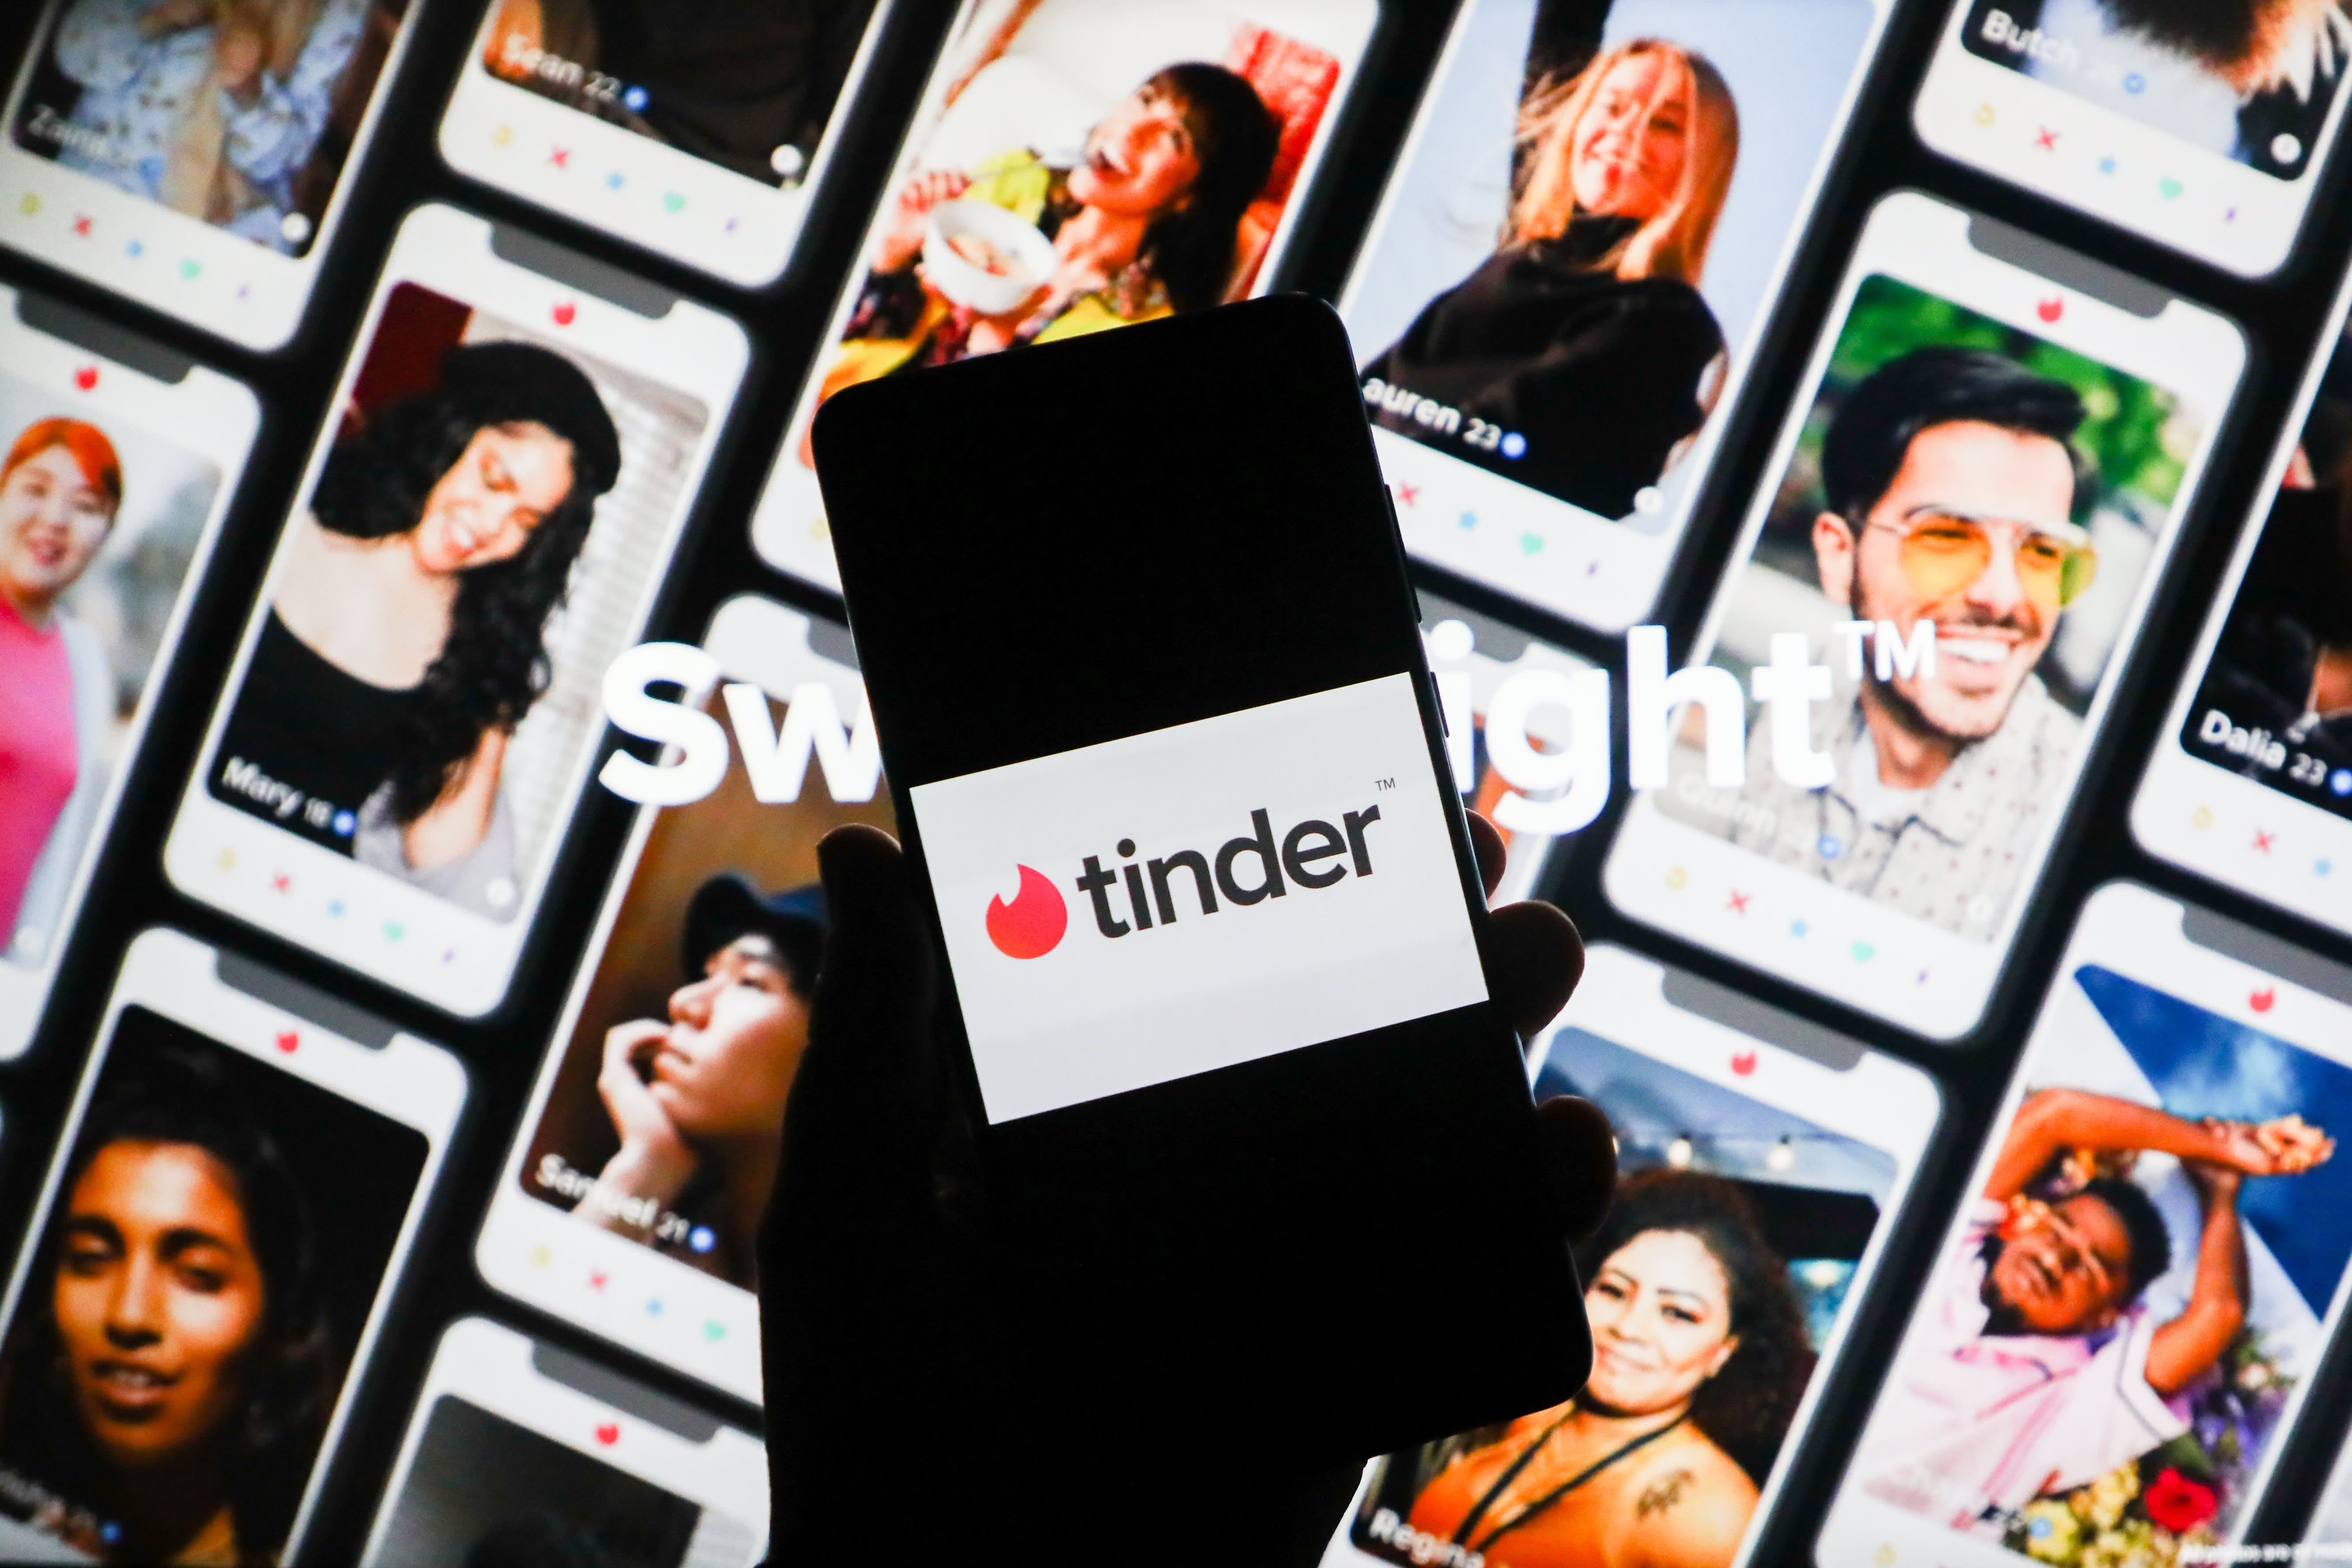 Match Group shares can rally 30% thanks to a recovery in Tinder, says BTIG